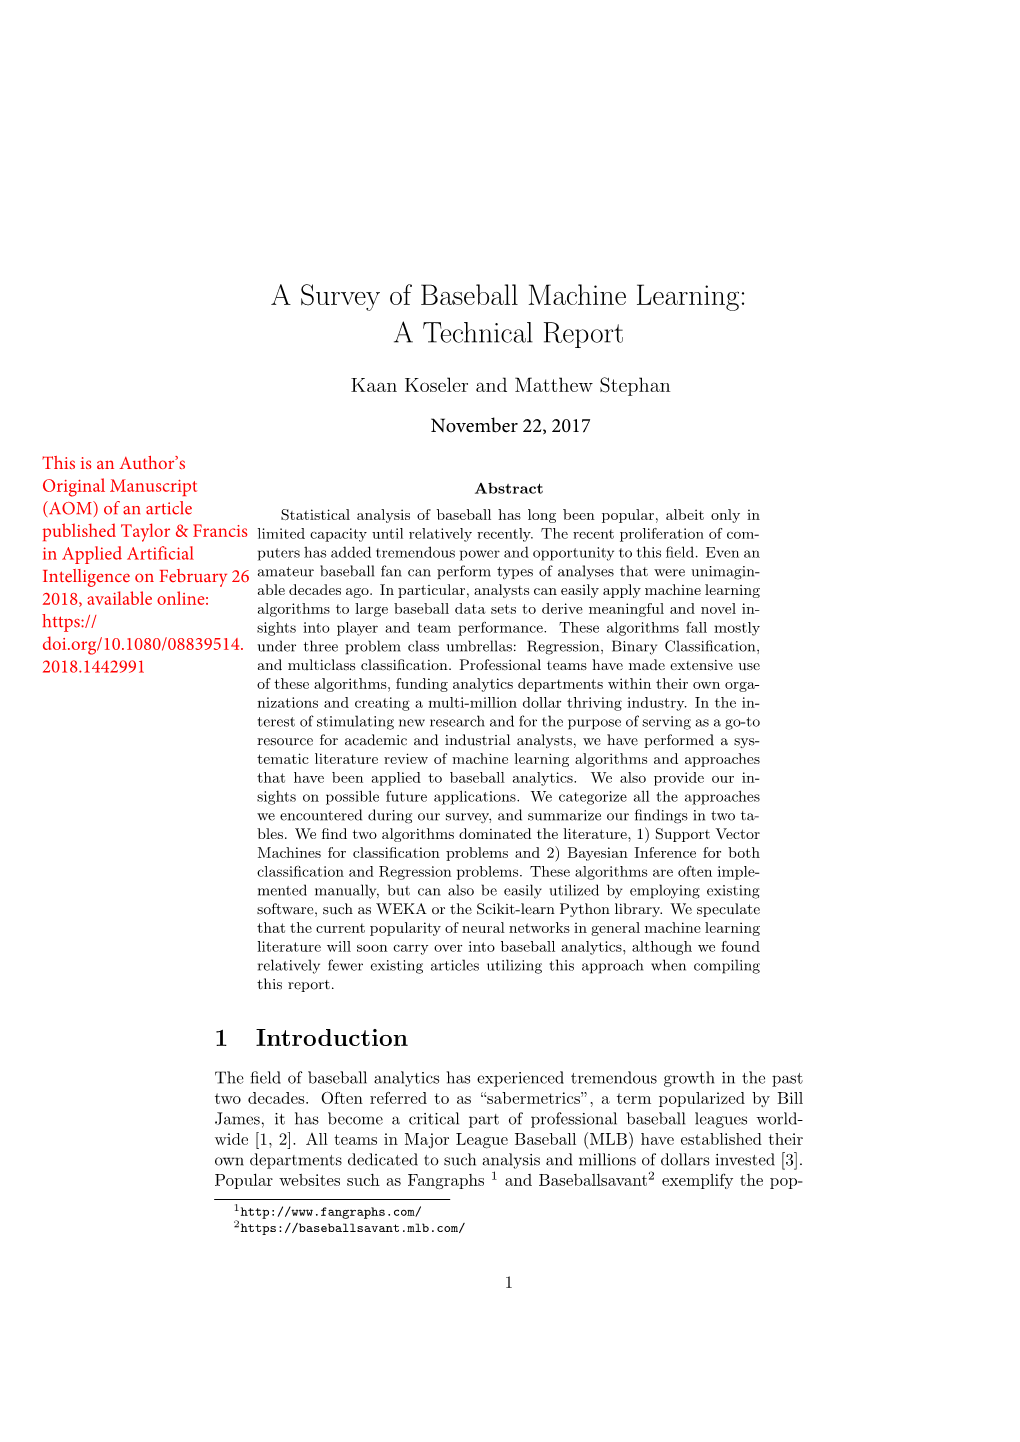 A Survey of Baseball Machine Learning: a Technical Report